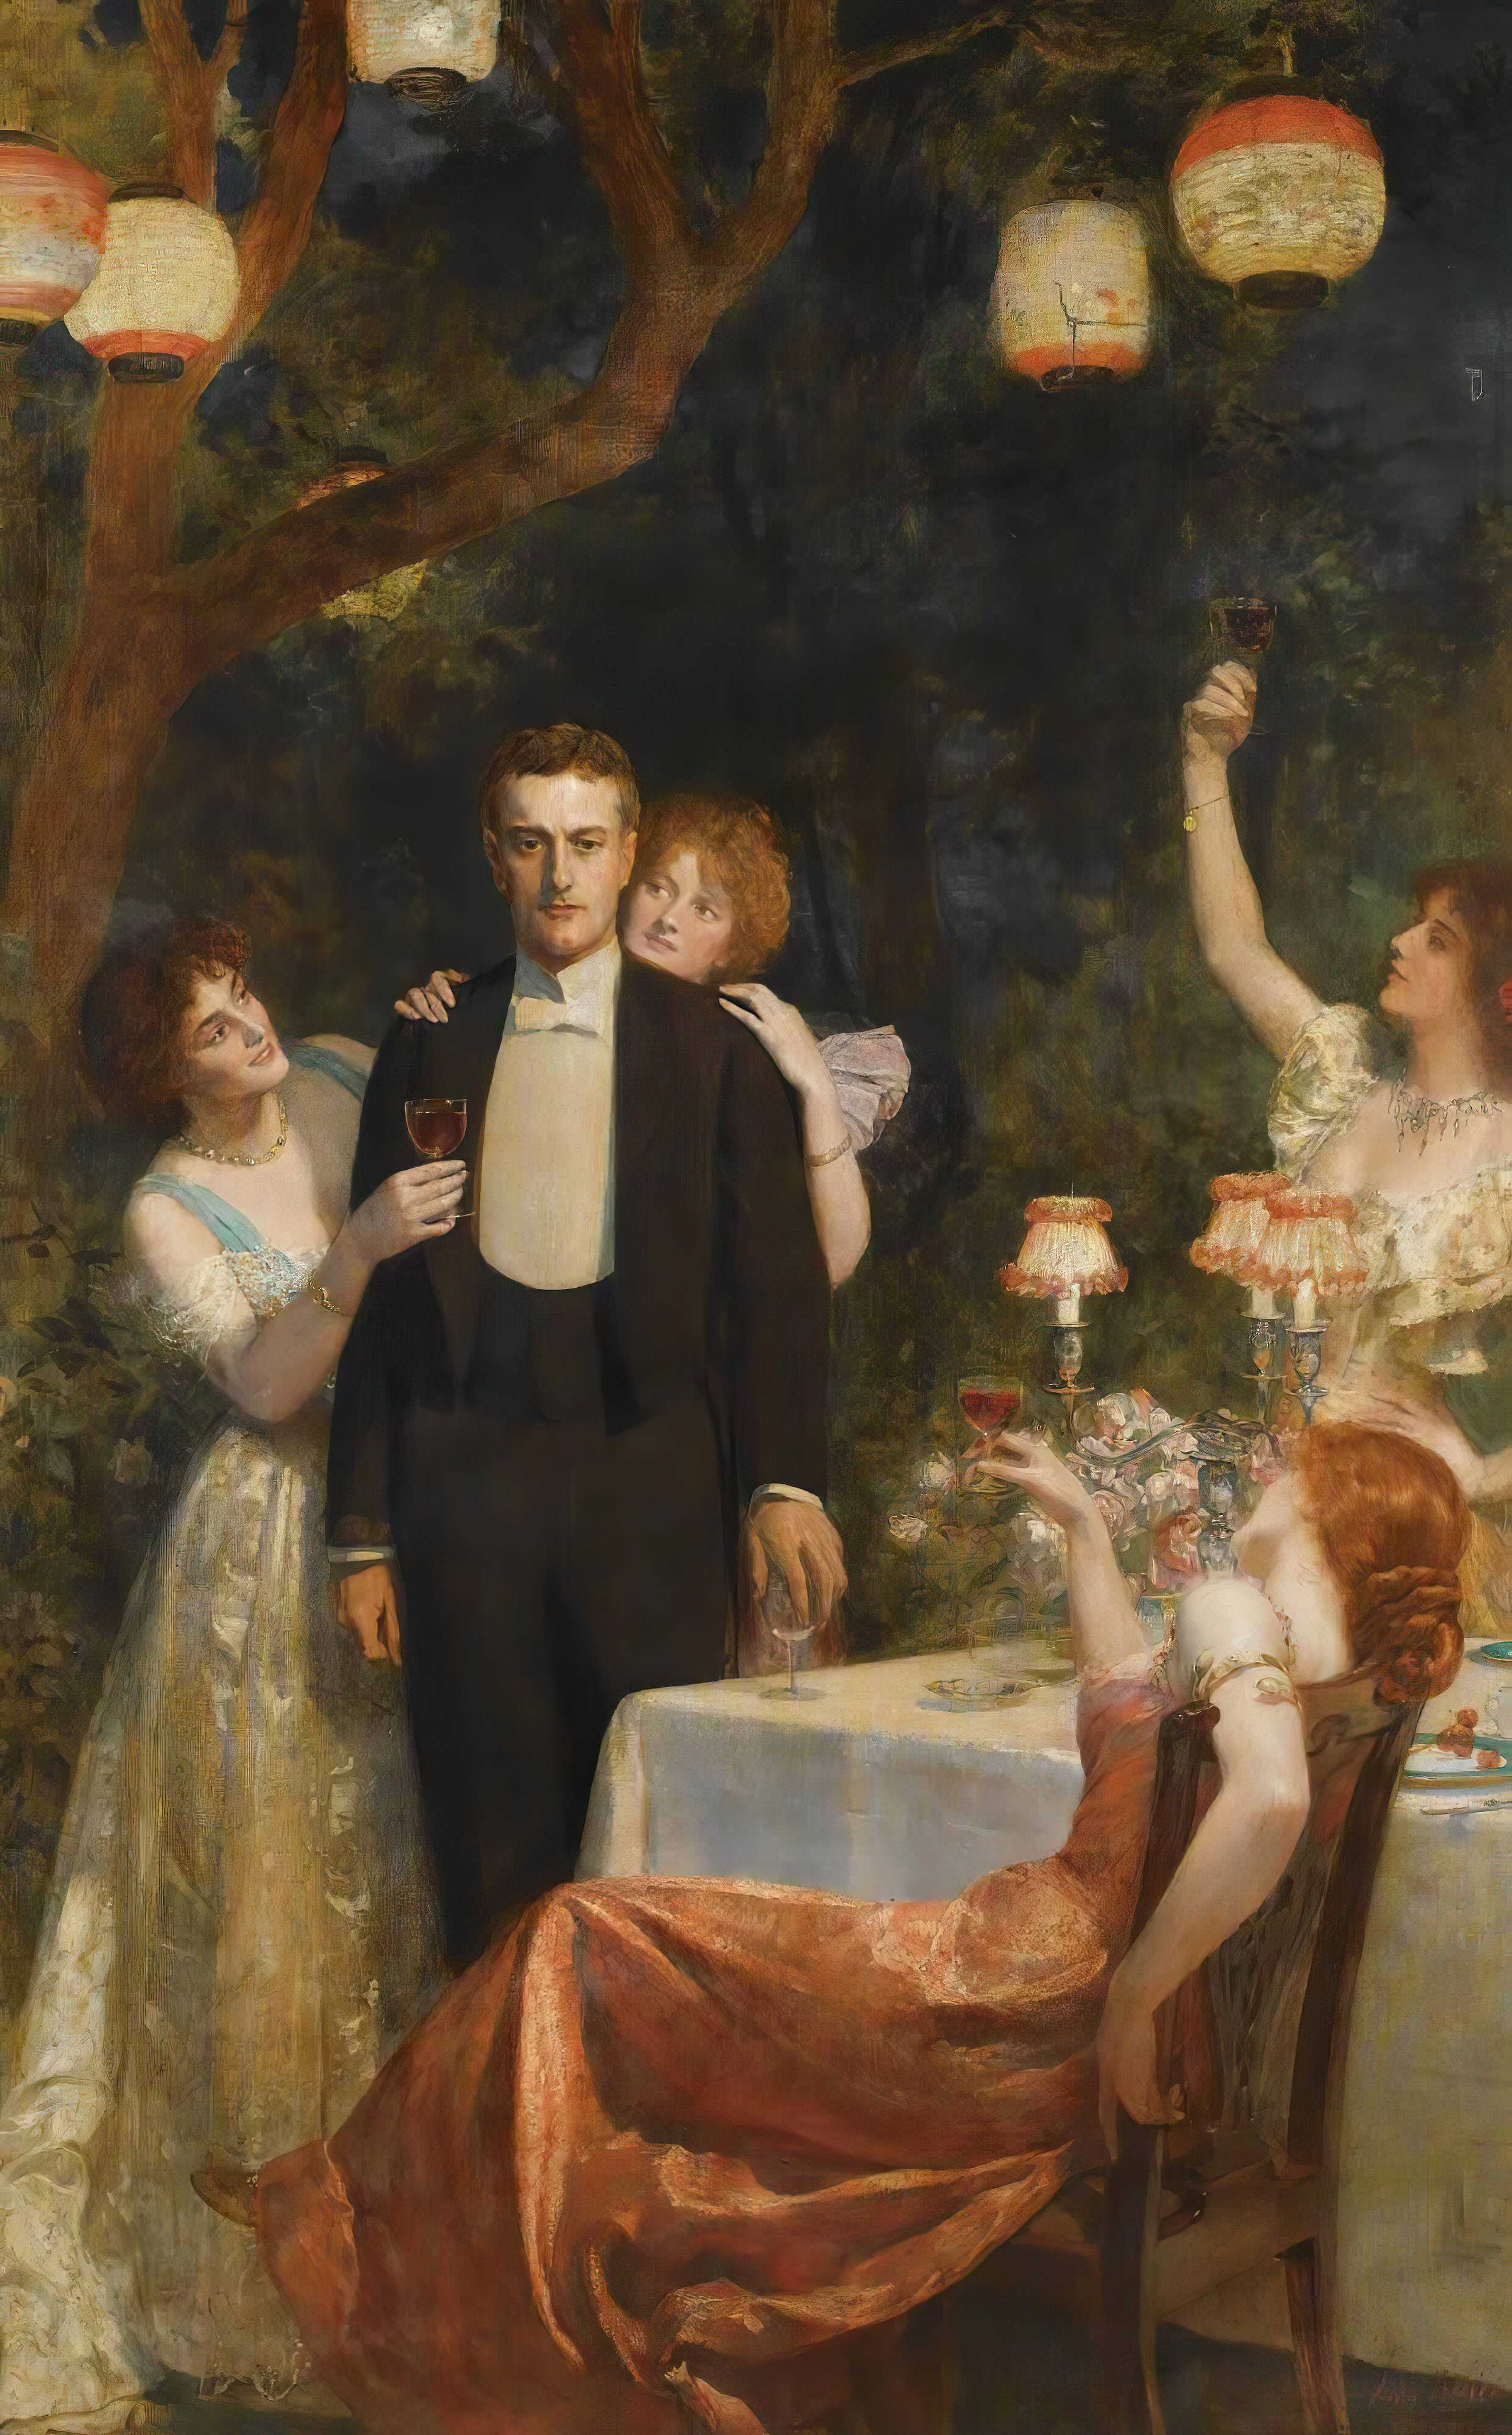 Find out more about John Collier - The Garden Of Armida